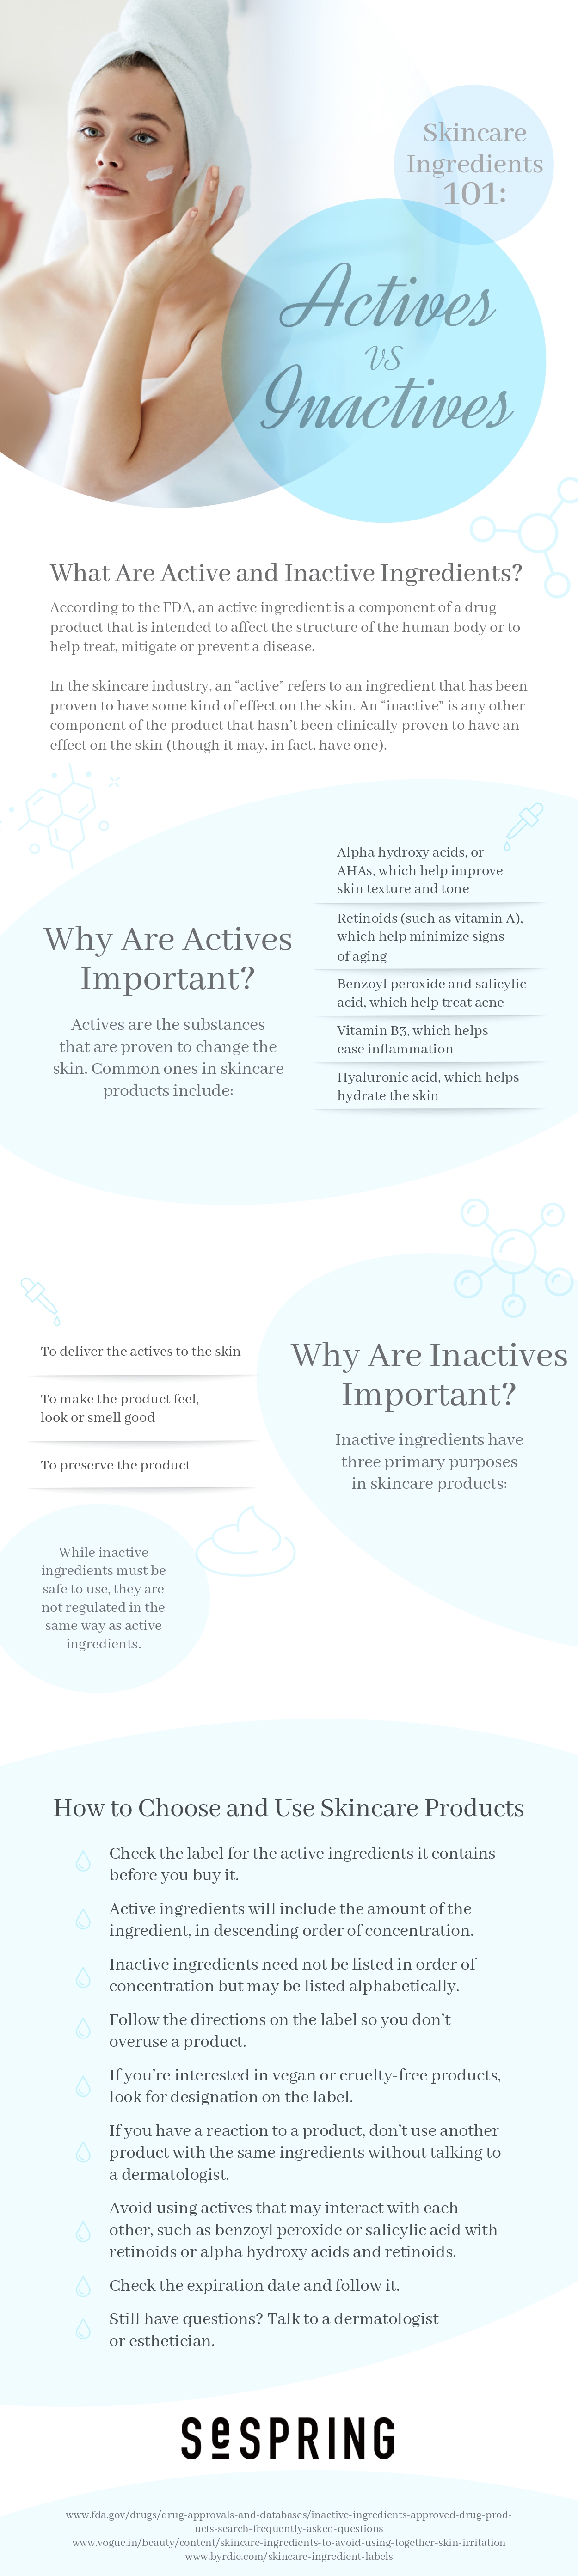 SeSpring - Skincare Ingredients Actives vs. Inactives